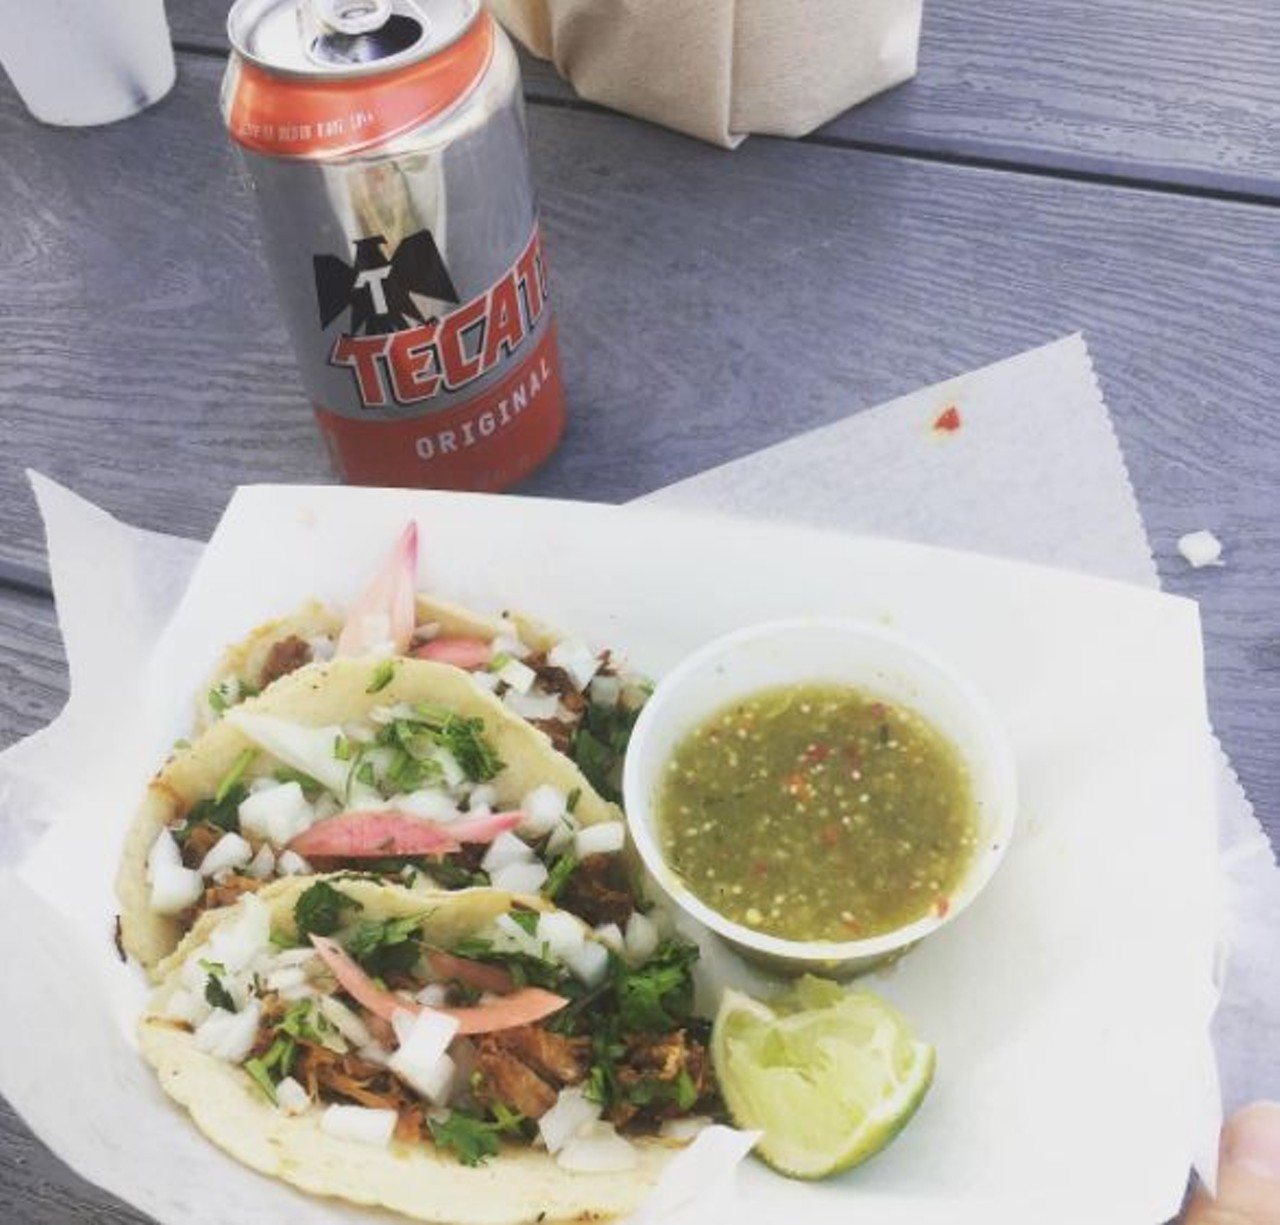 Sanchos Cantina & Cocina
628 Jackson St., (210) 320-1840
Sit out on the patio and slam a few mini tacos down your throat.
Photo via Instagram, mary_mosleyjensen